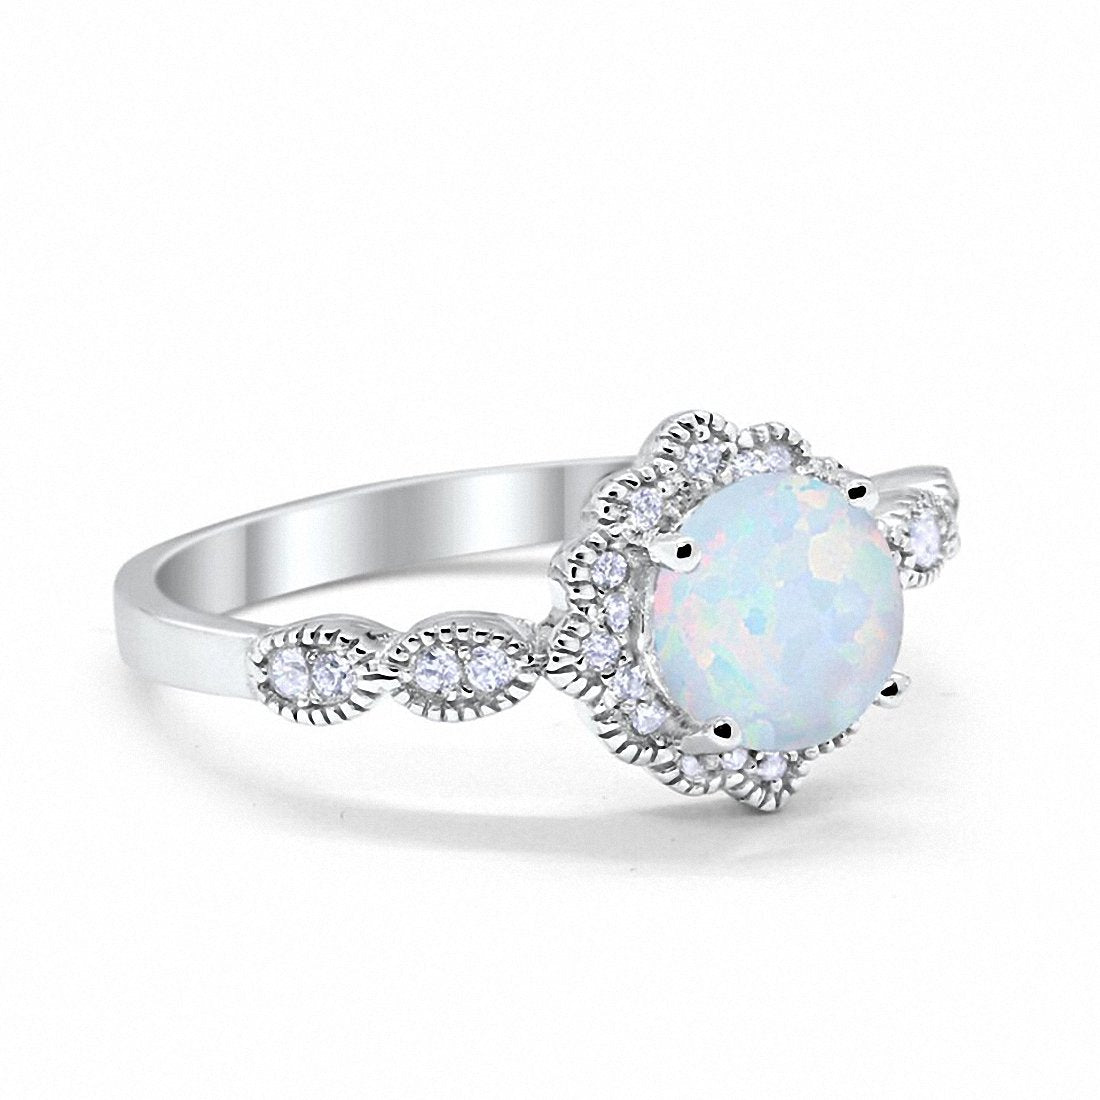 Floral Art Wedding Engagement Ring Lab Created White Opal 925 Sterling Silver